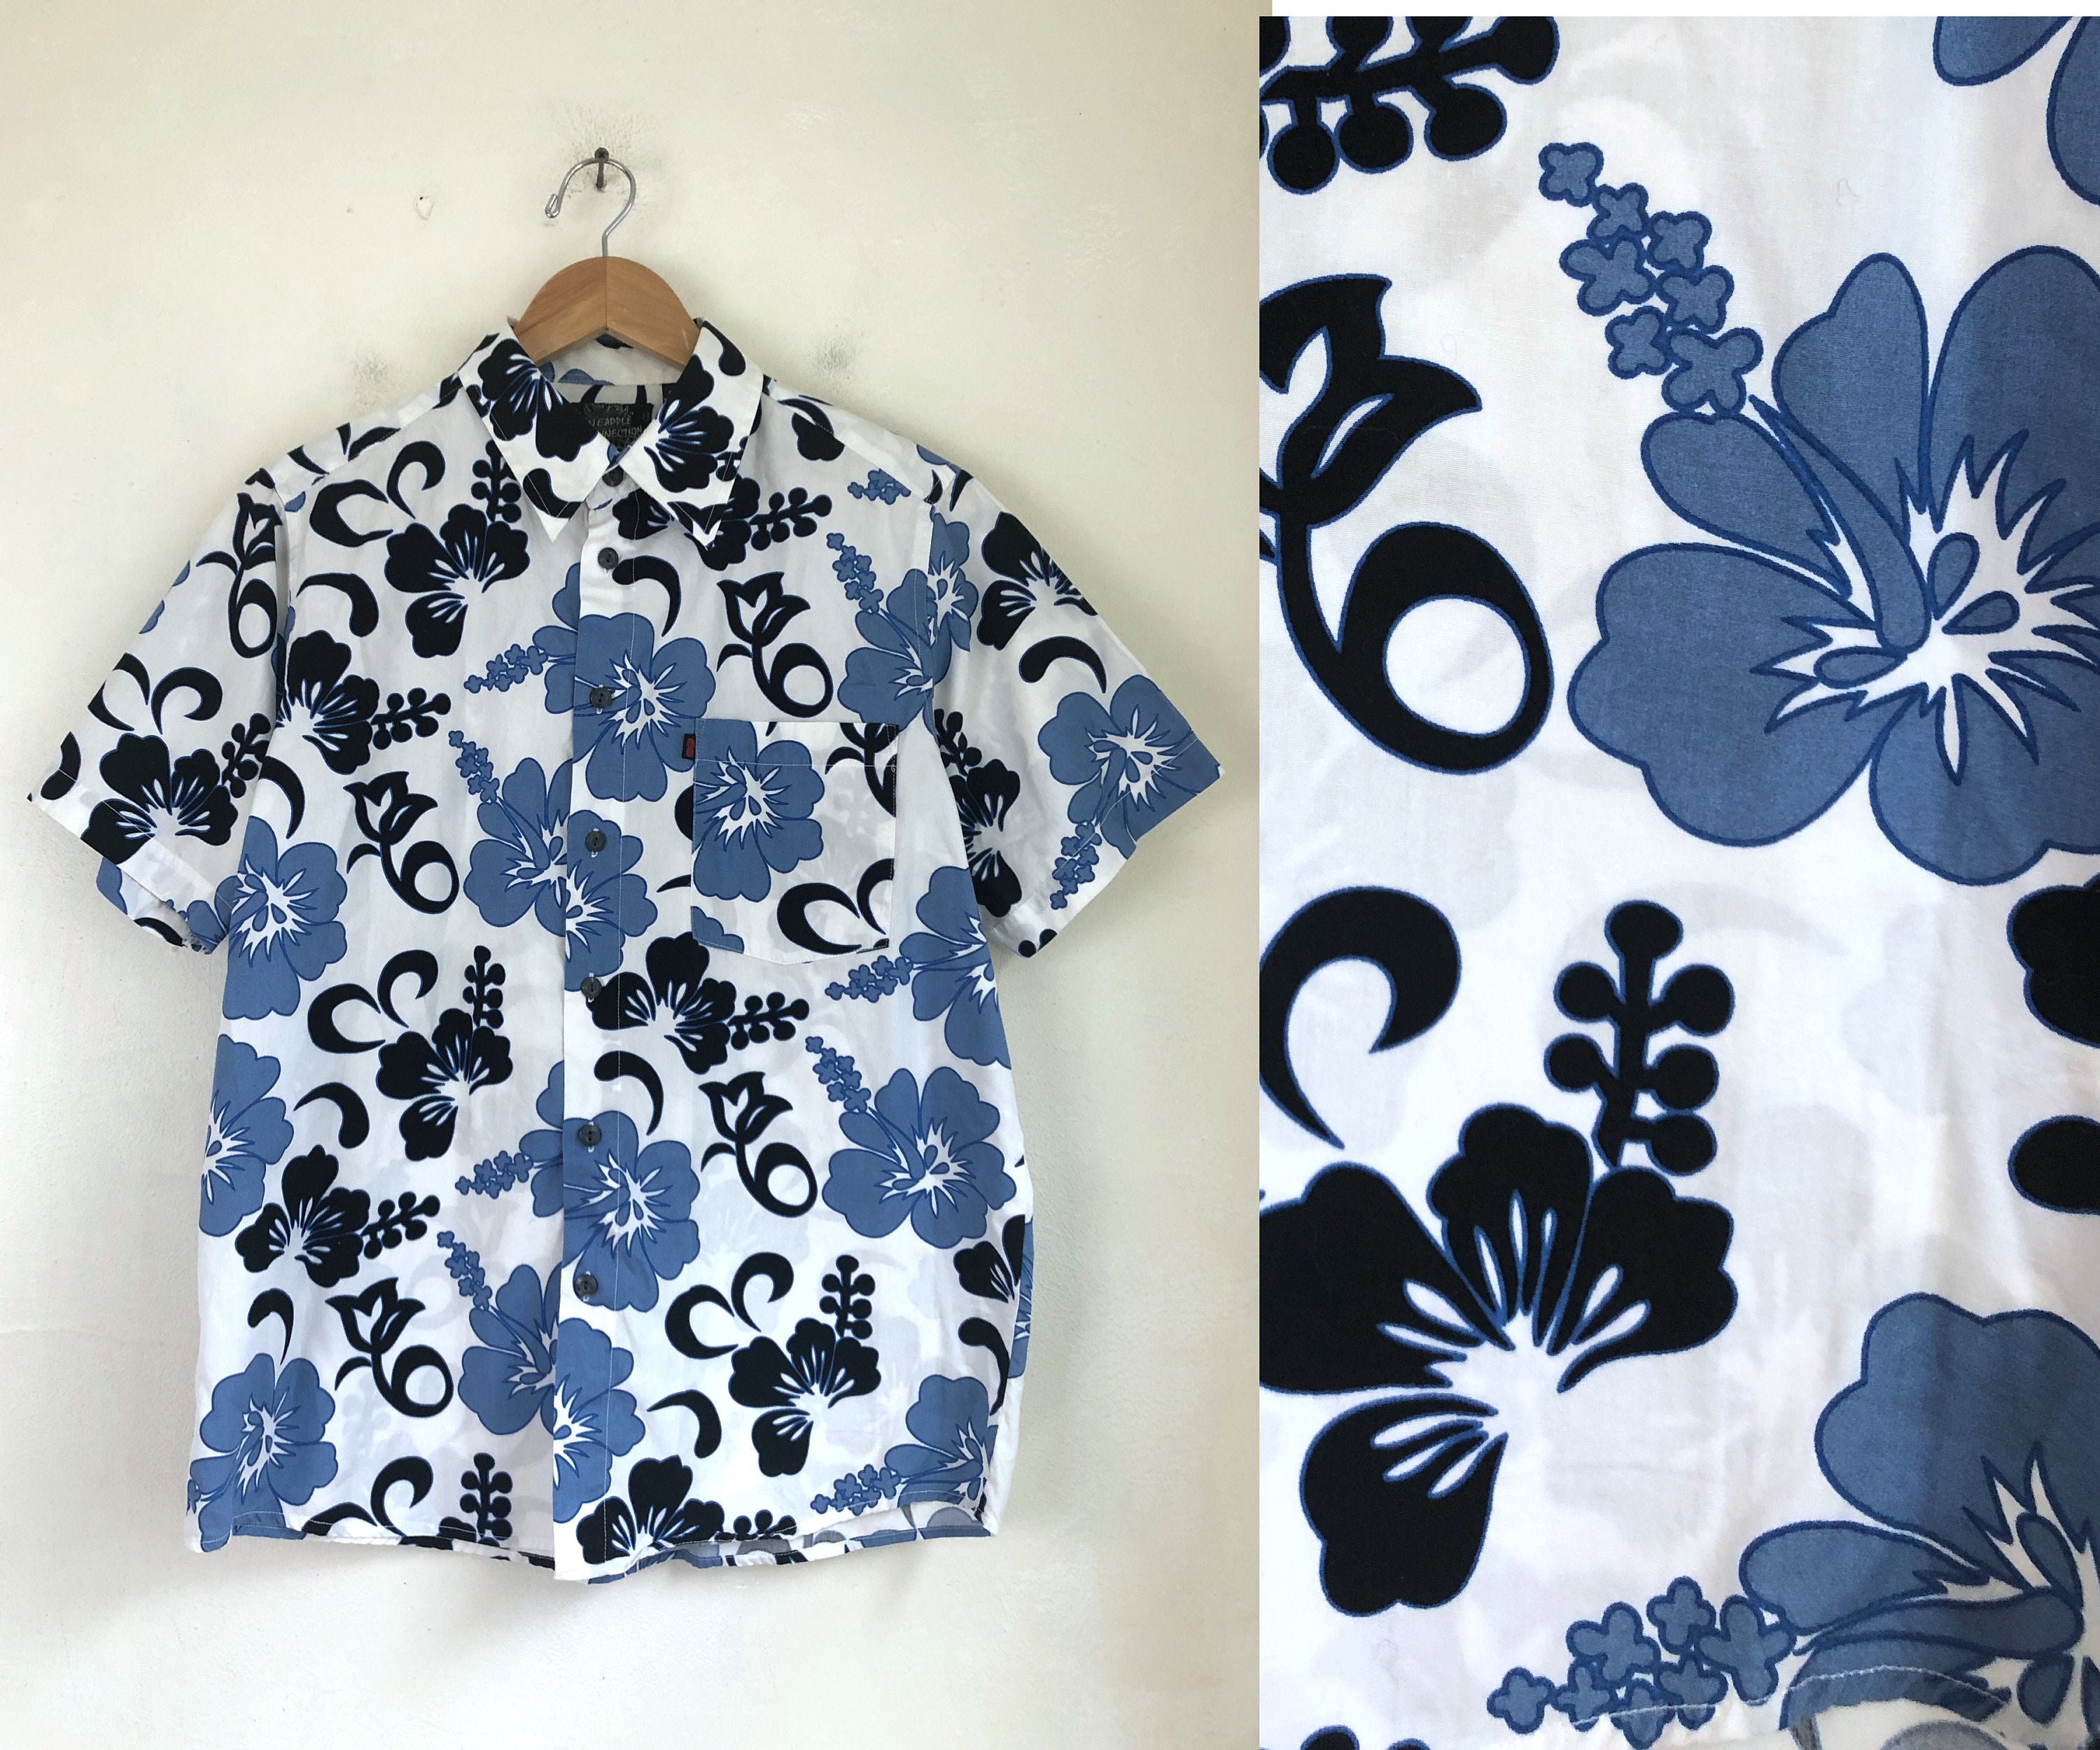 Unisex Tropical Hibiscus Print Casual Top Size Large to 1X Men's Shirt 90's Vintage Black White and Brown Hawaiian Shirt